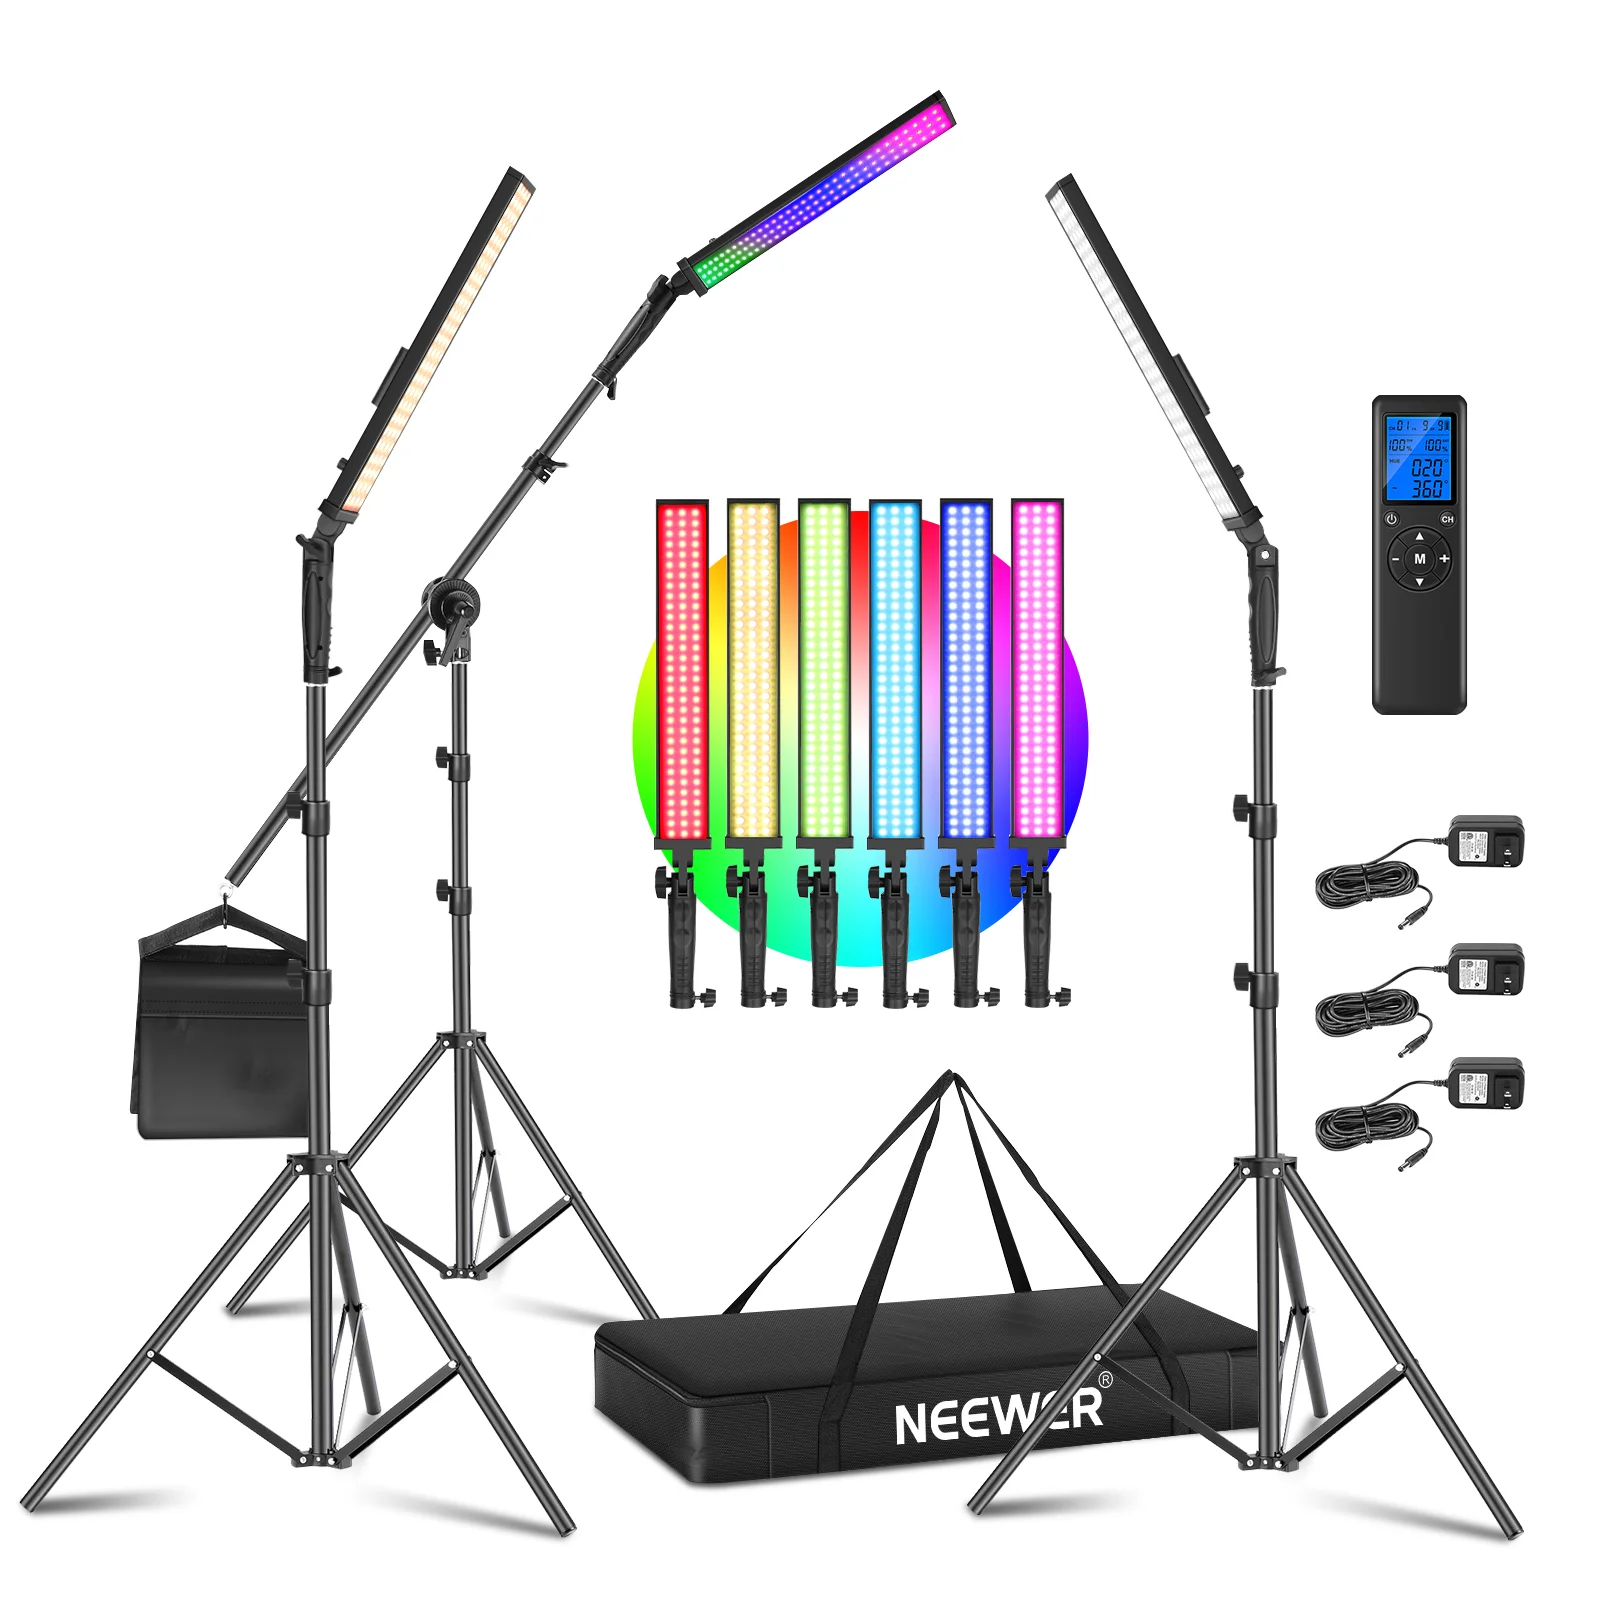 

Neewer 3-Pack RGB LED Light Stick Kit, 21W Dimmable 3200K~5600K Bi-Color Handheld Light With 2.4G Remote/Stand/Bag For YouTube